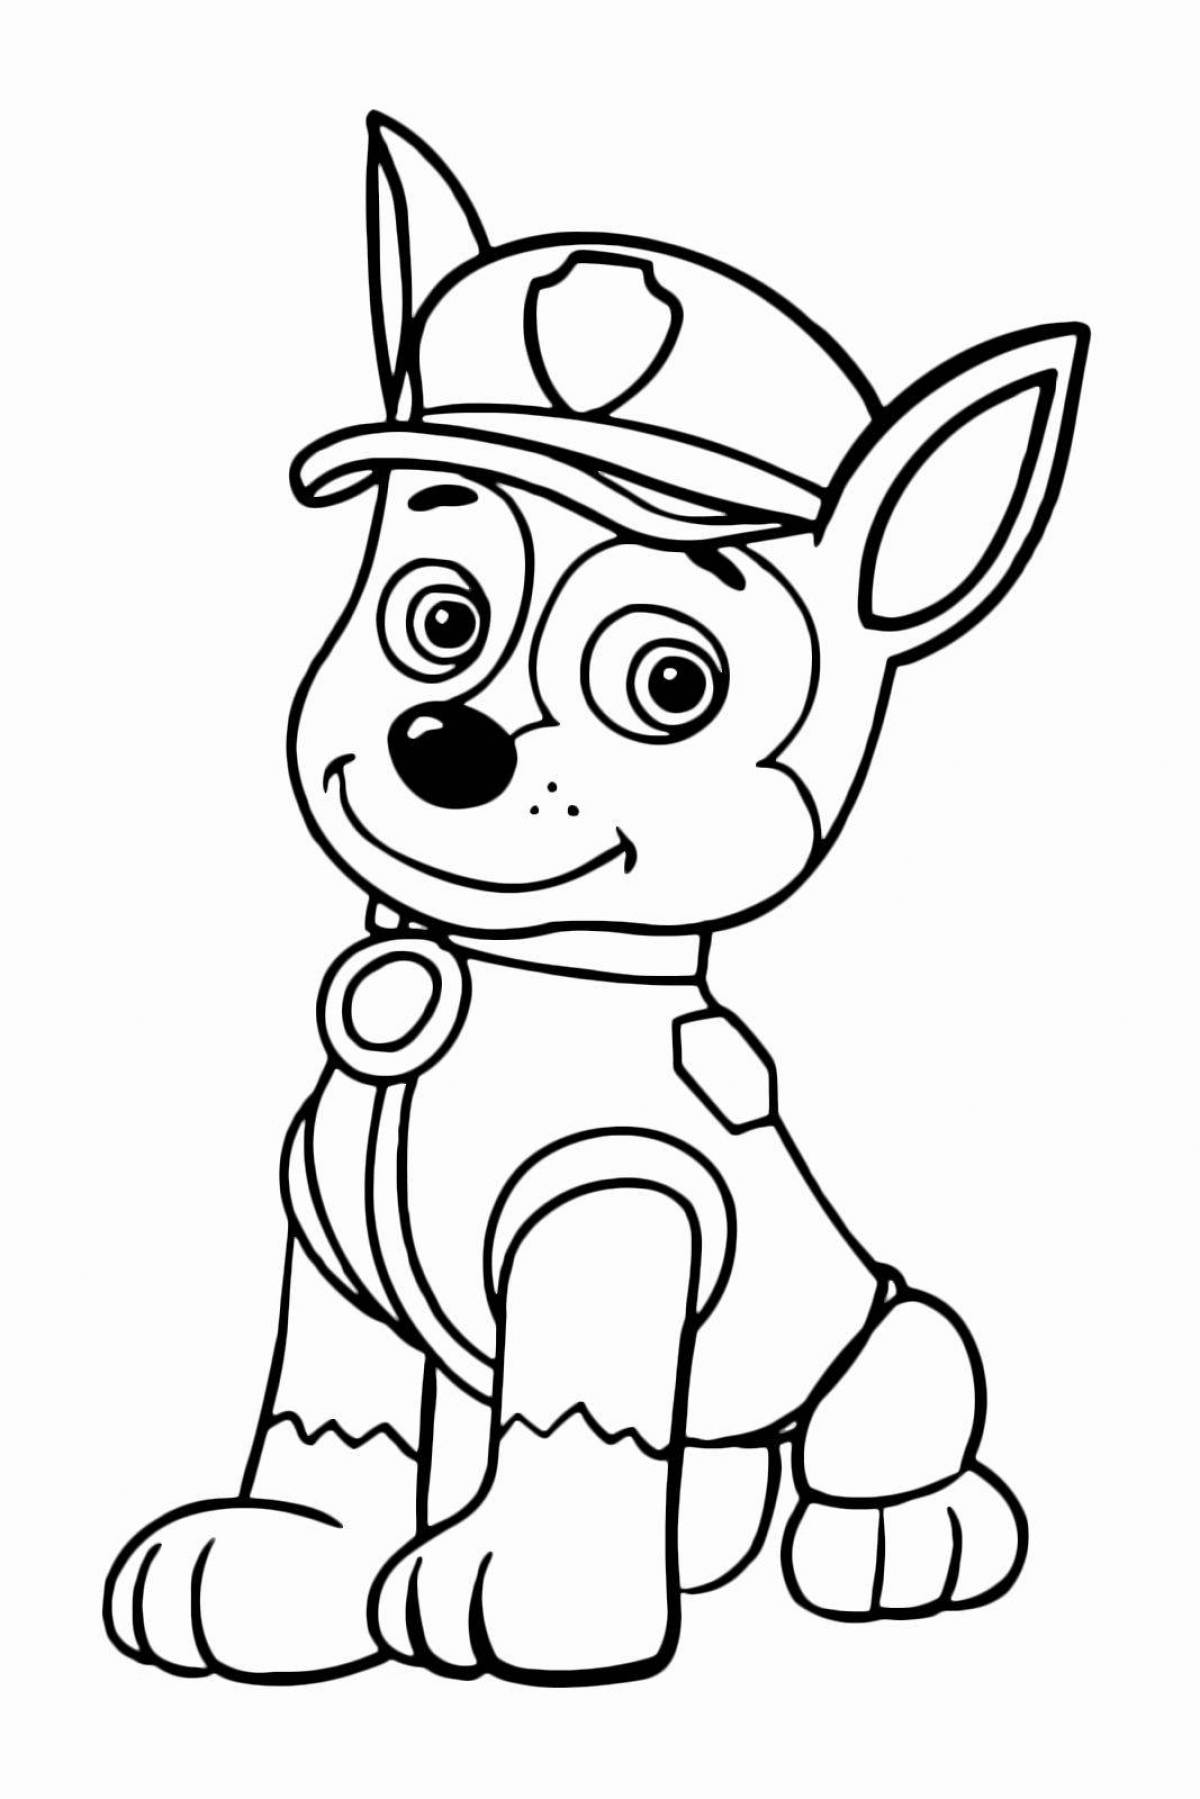 Paw Patrol Vibrant Coloring Page for Toddlers